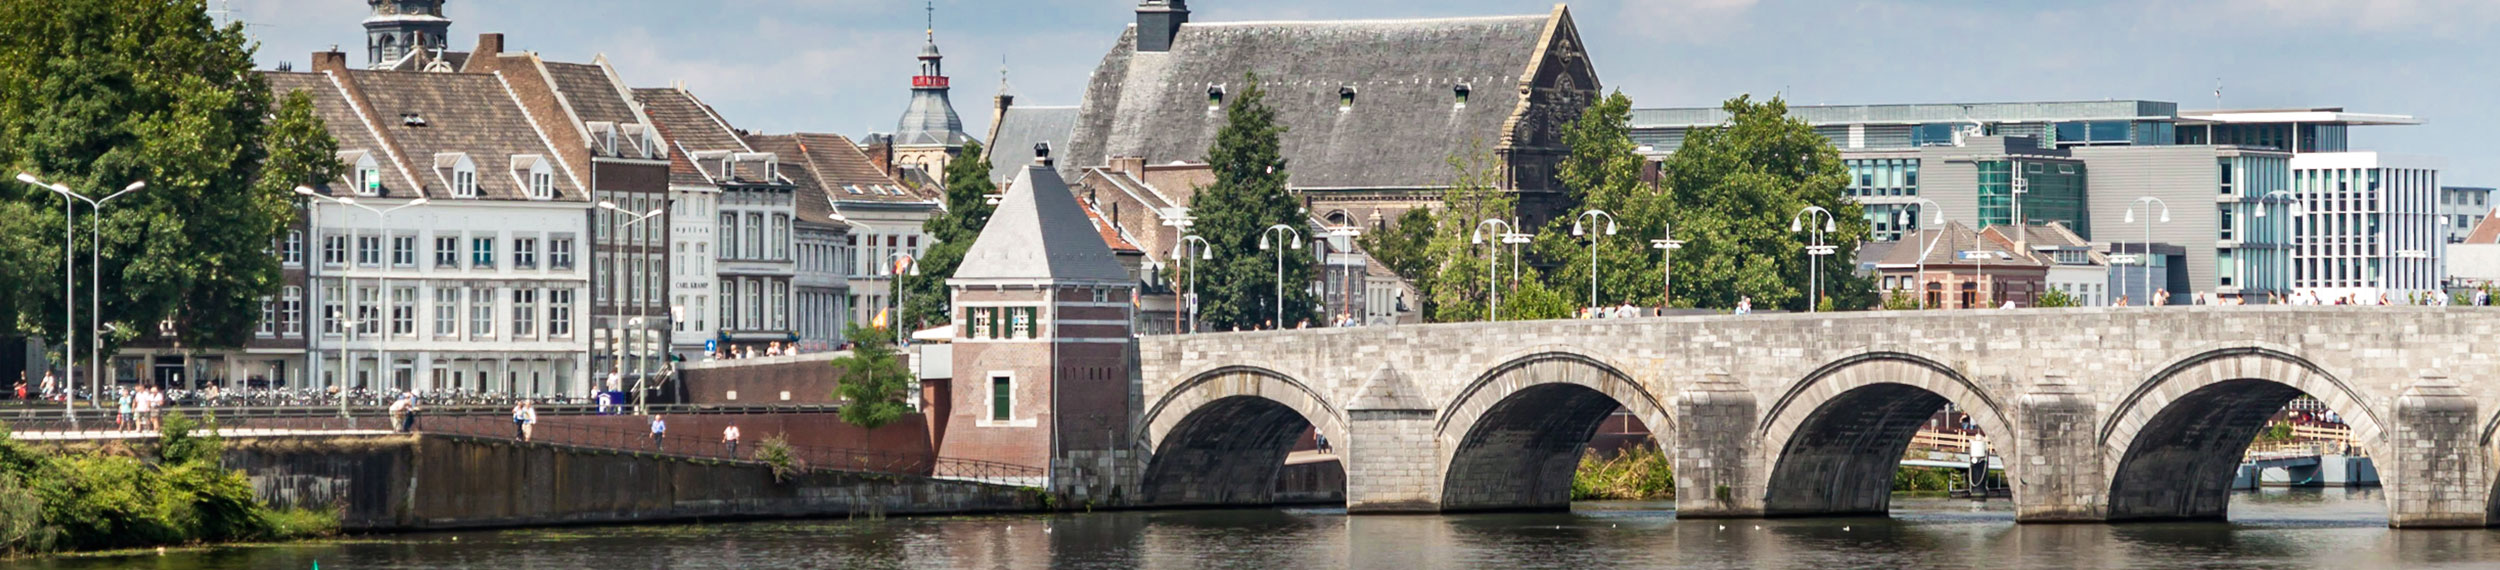 The St. Servatius Bridge and buildings near the river Meuse in Maastricht, Netherlands. 